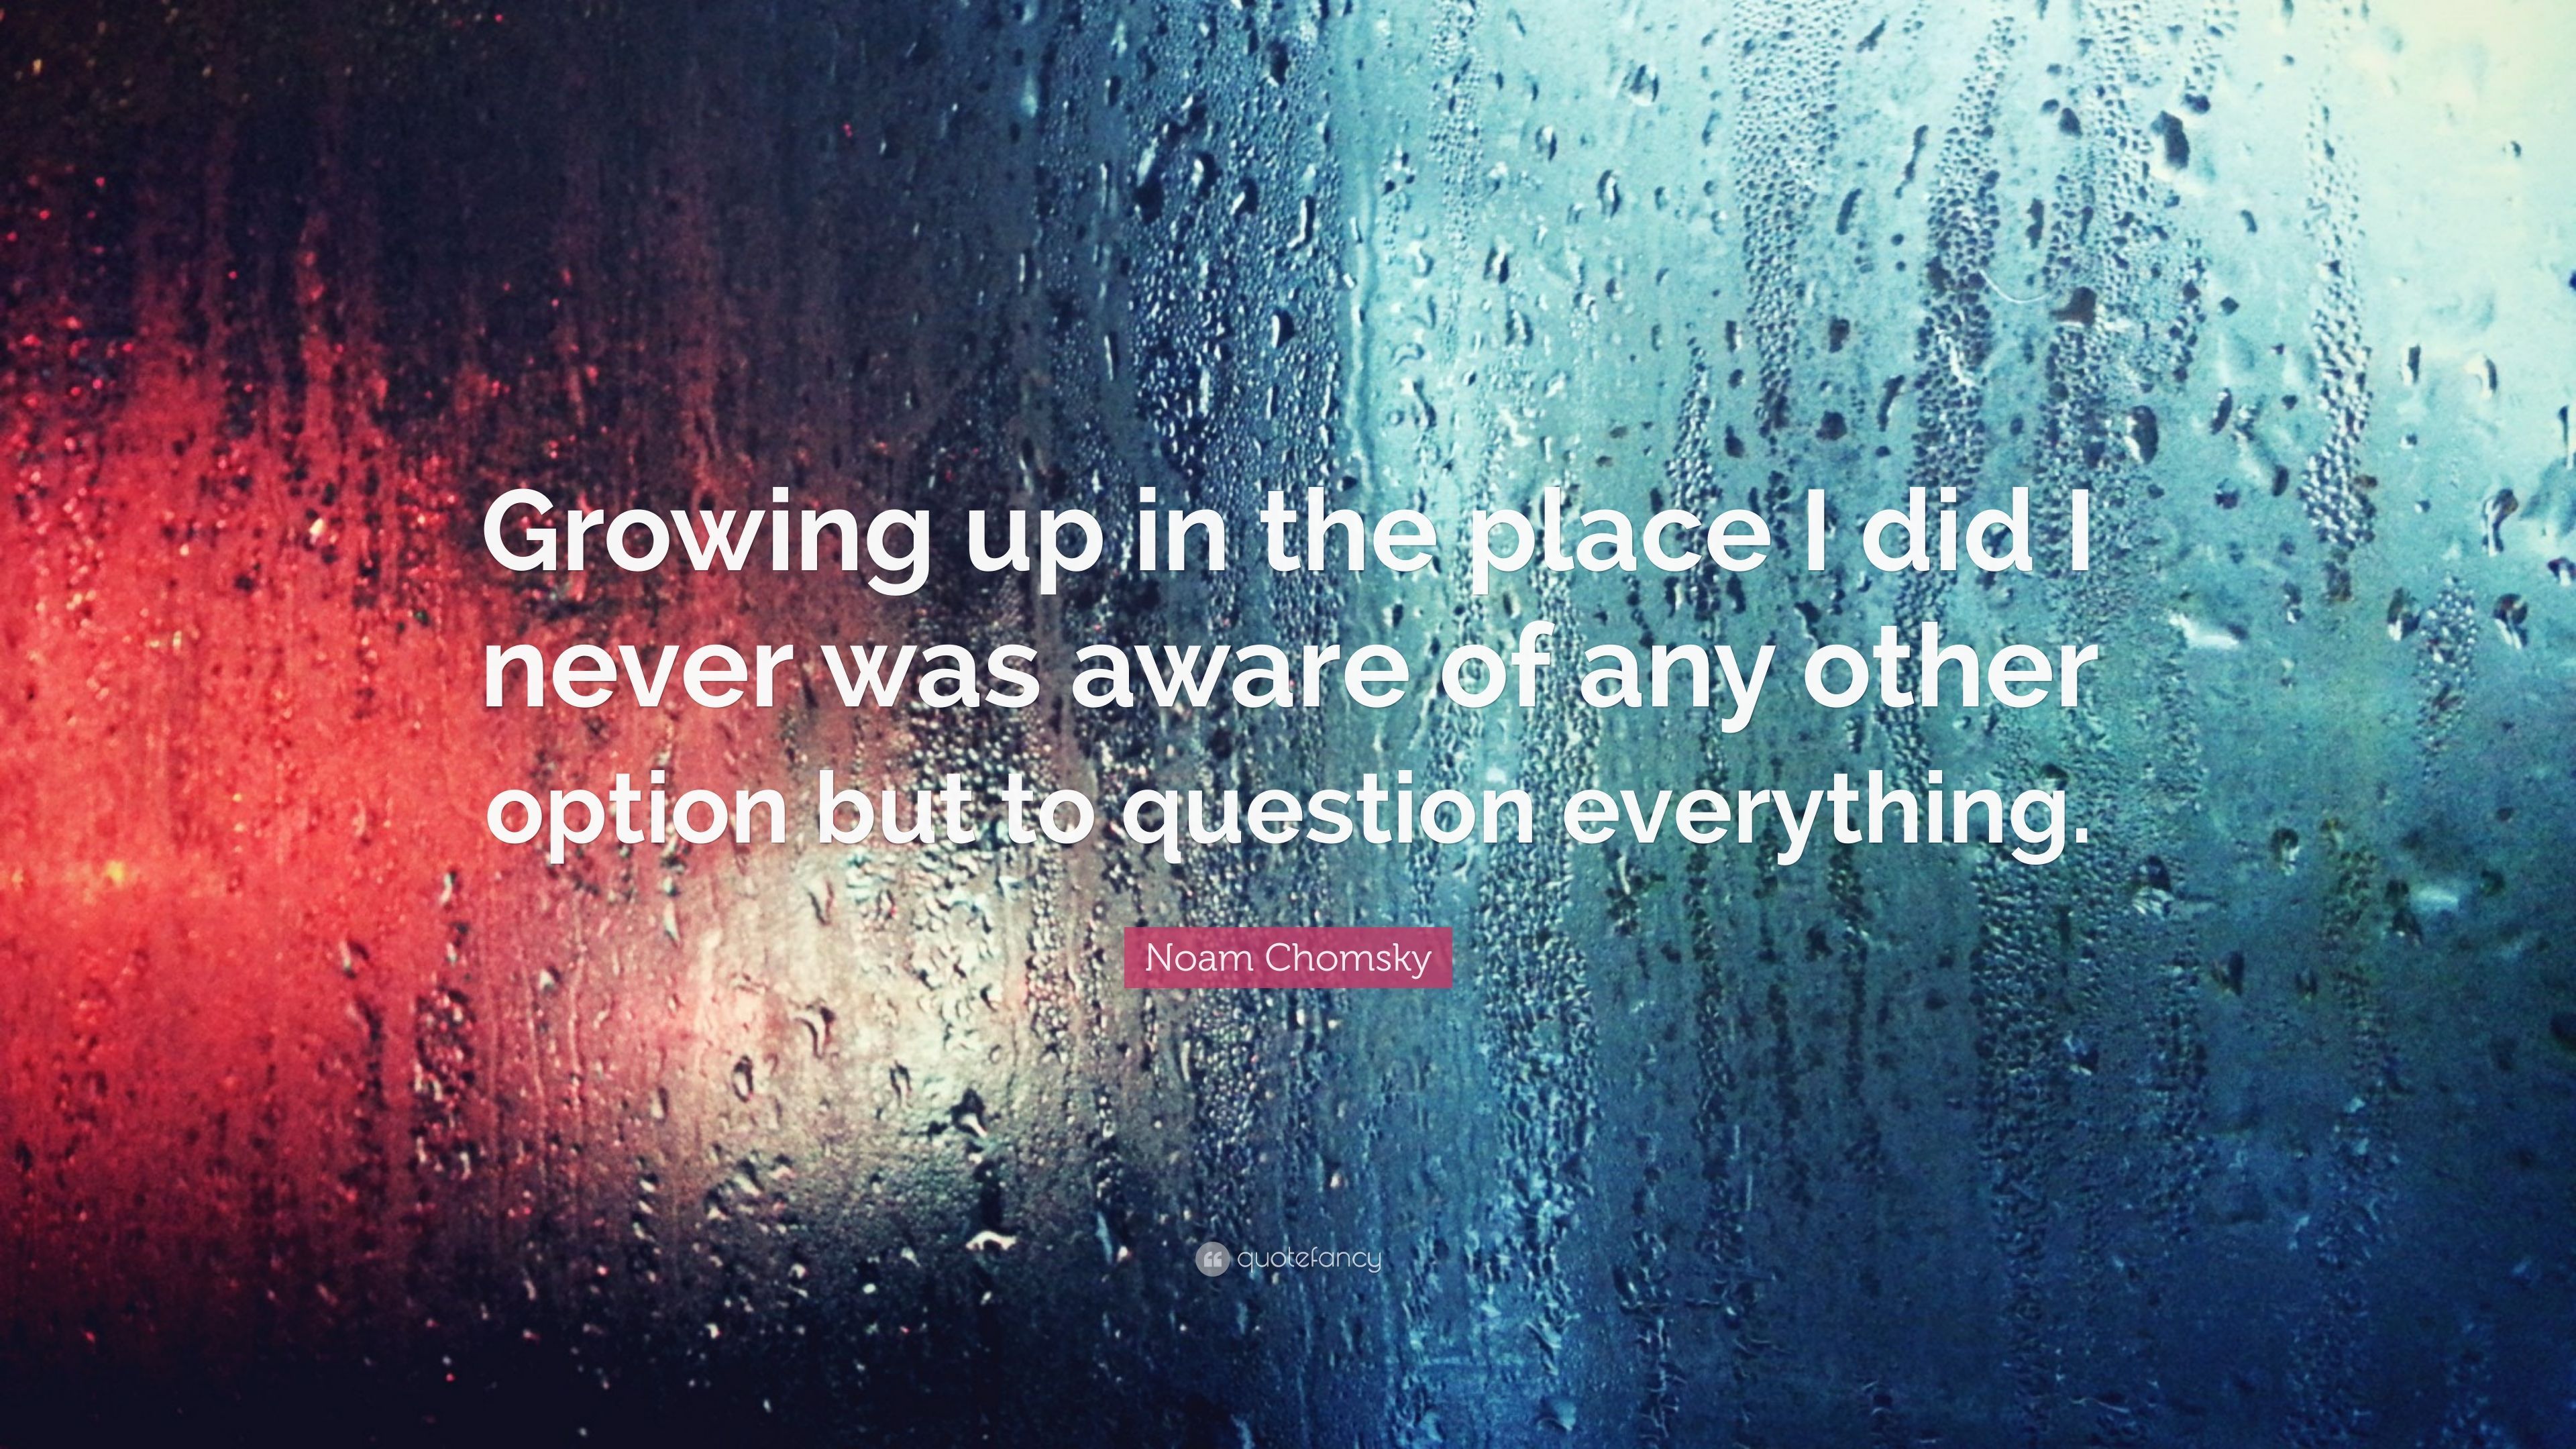 Noam Chomsky Quote: “Growing up in the place I did I never was aware of any other option but to question everything.” (9 wallpaper)